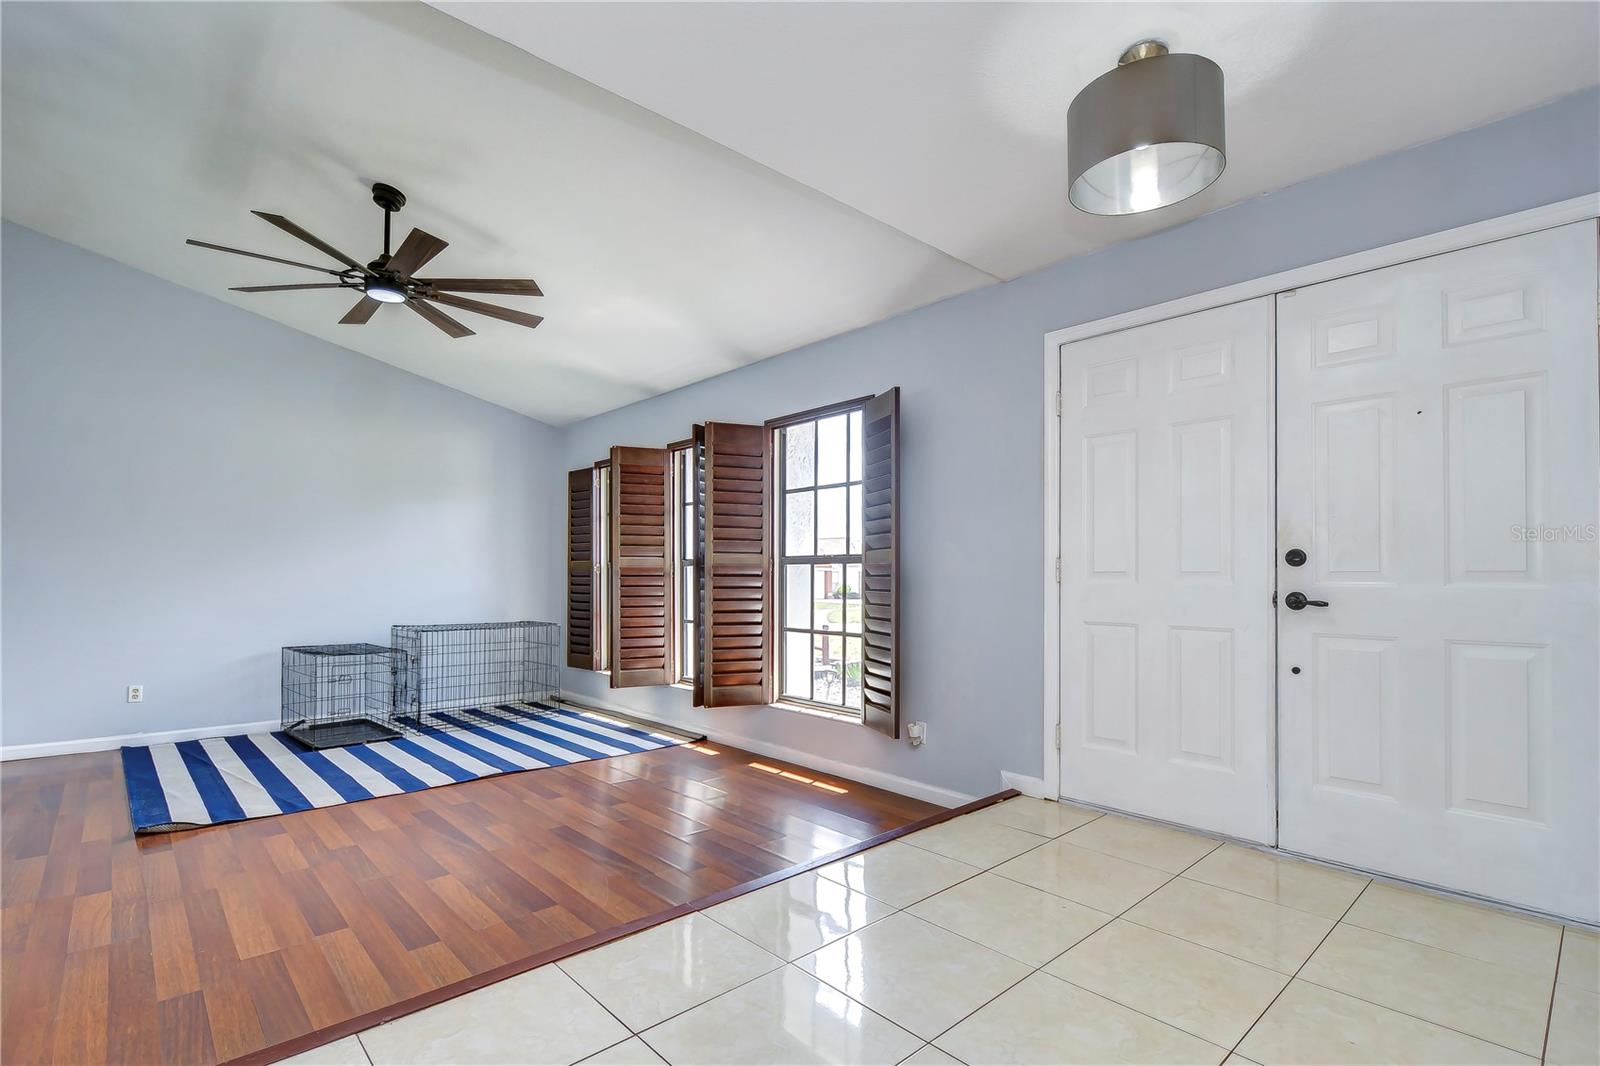 Formal living room with plantation shutters is the perfect spot to entertain!